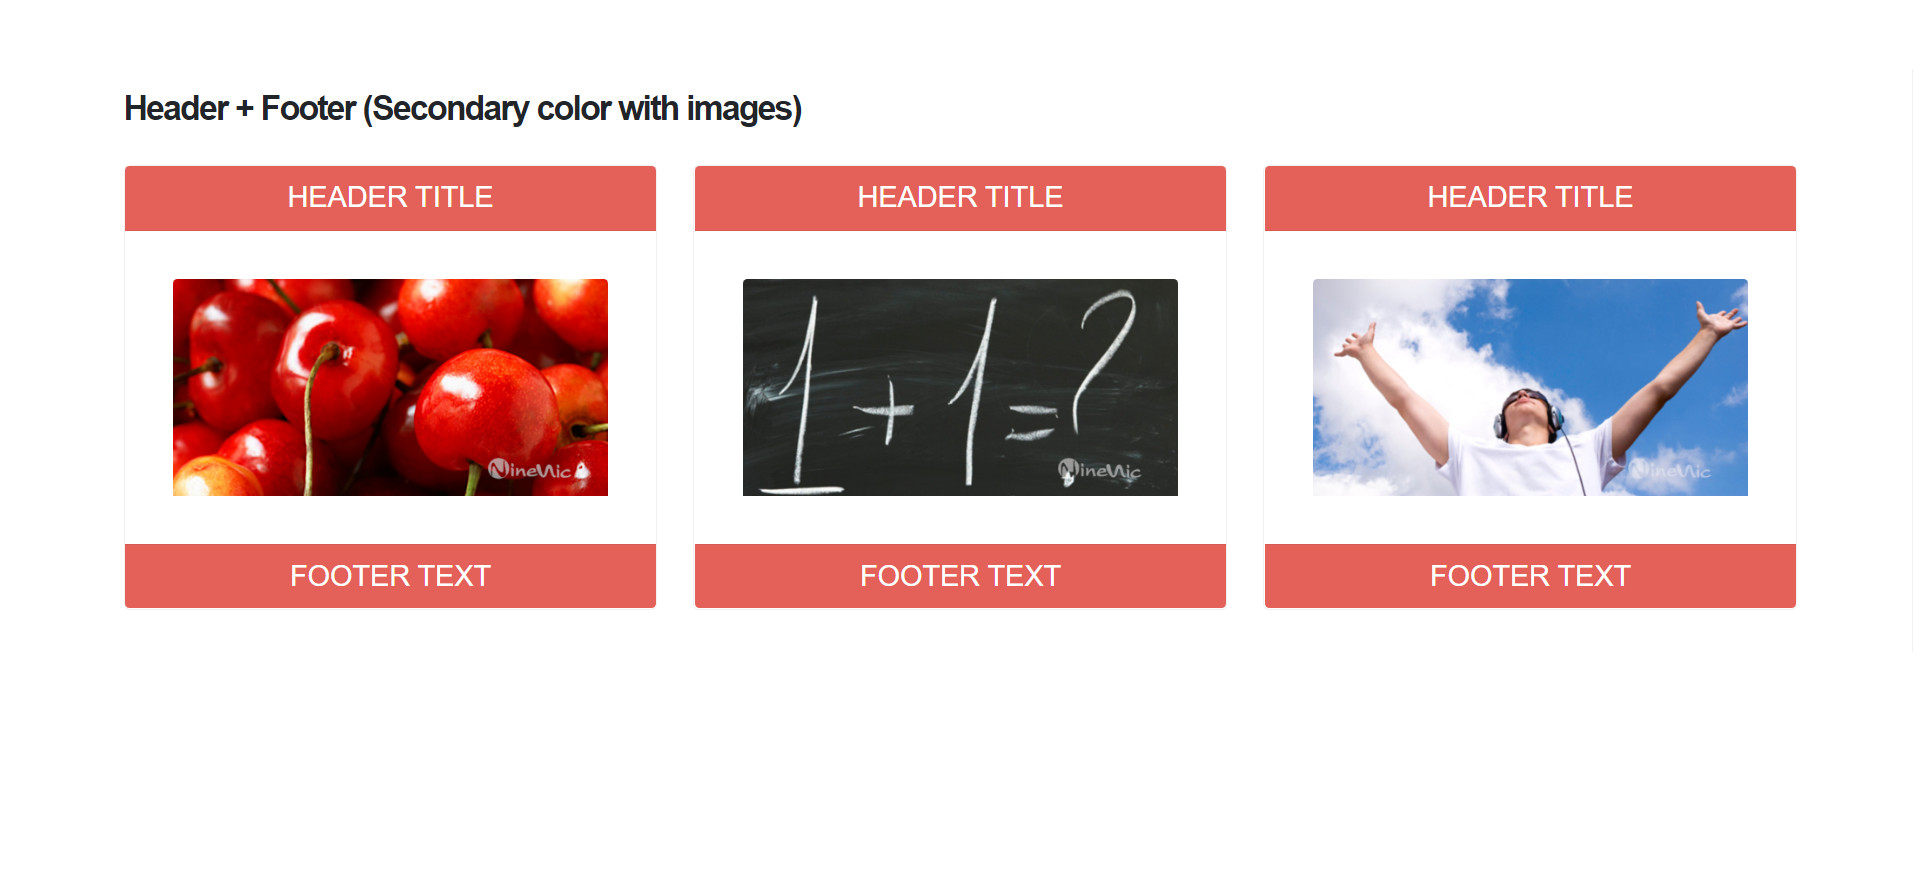 Shortcodes cards - header footer color secondary and image แนะนำ เว็บไซต์สำเร็จรูป NineNIC